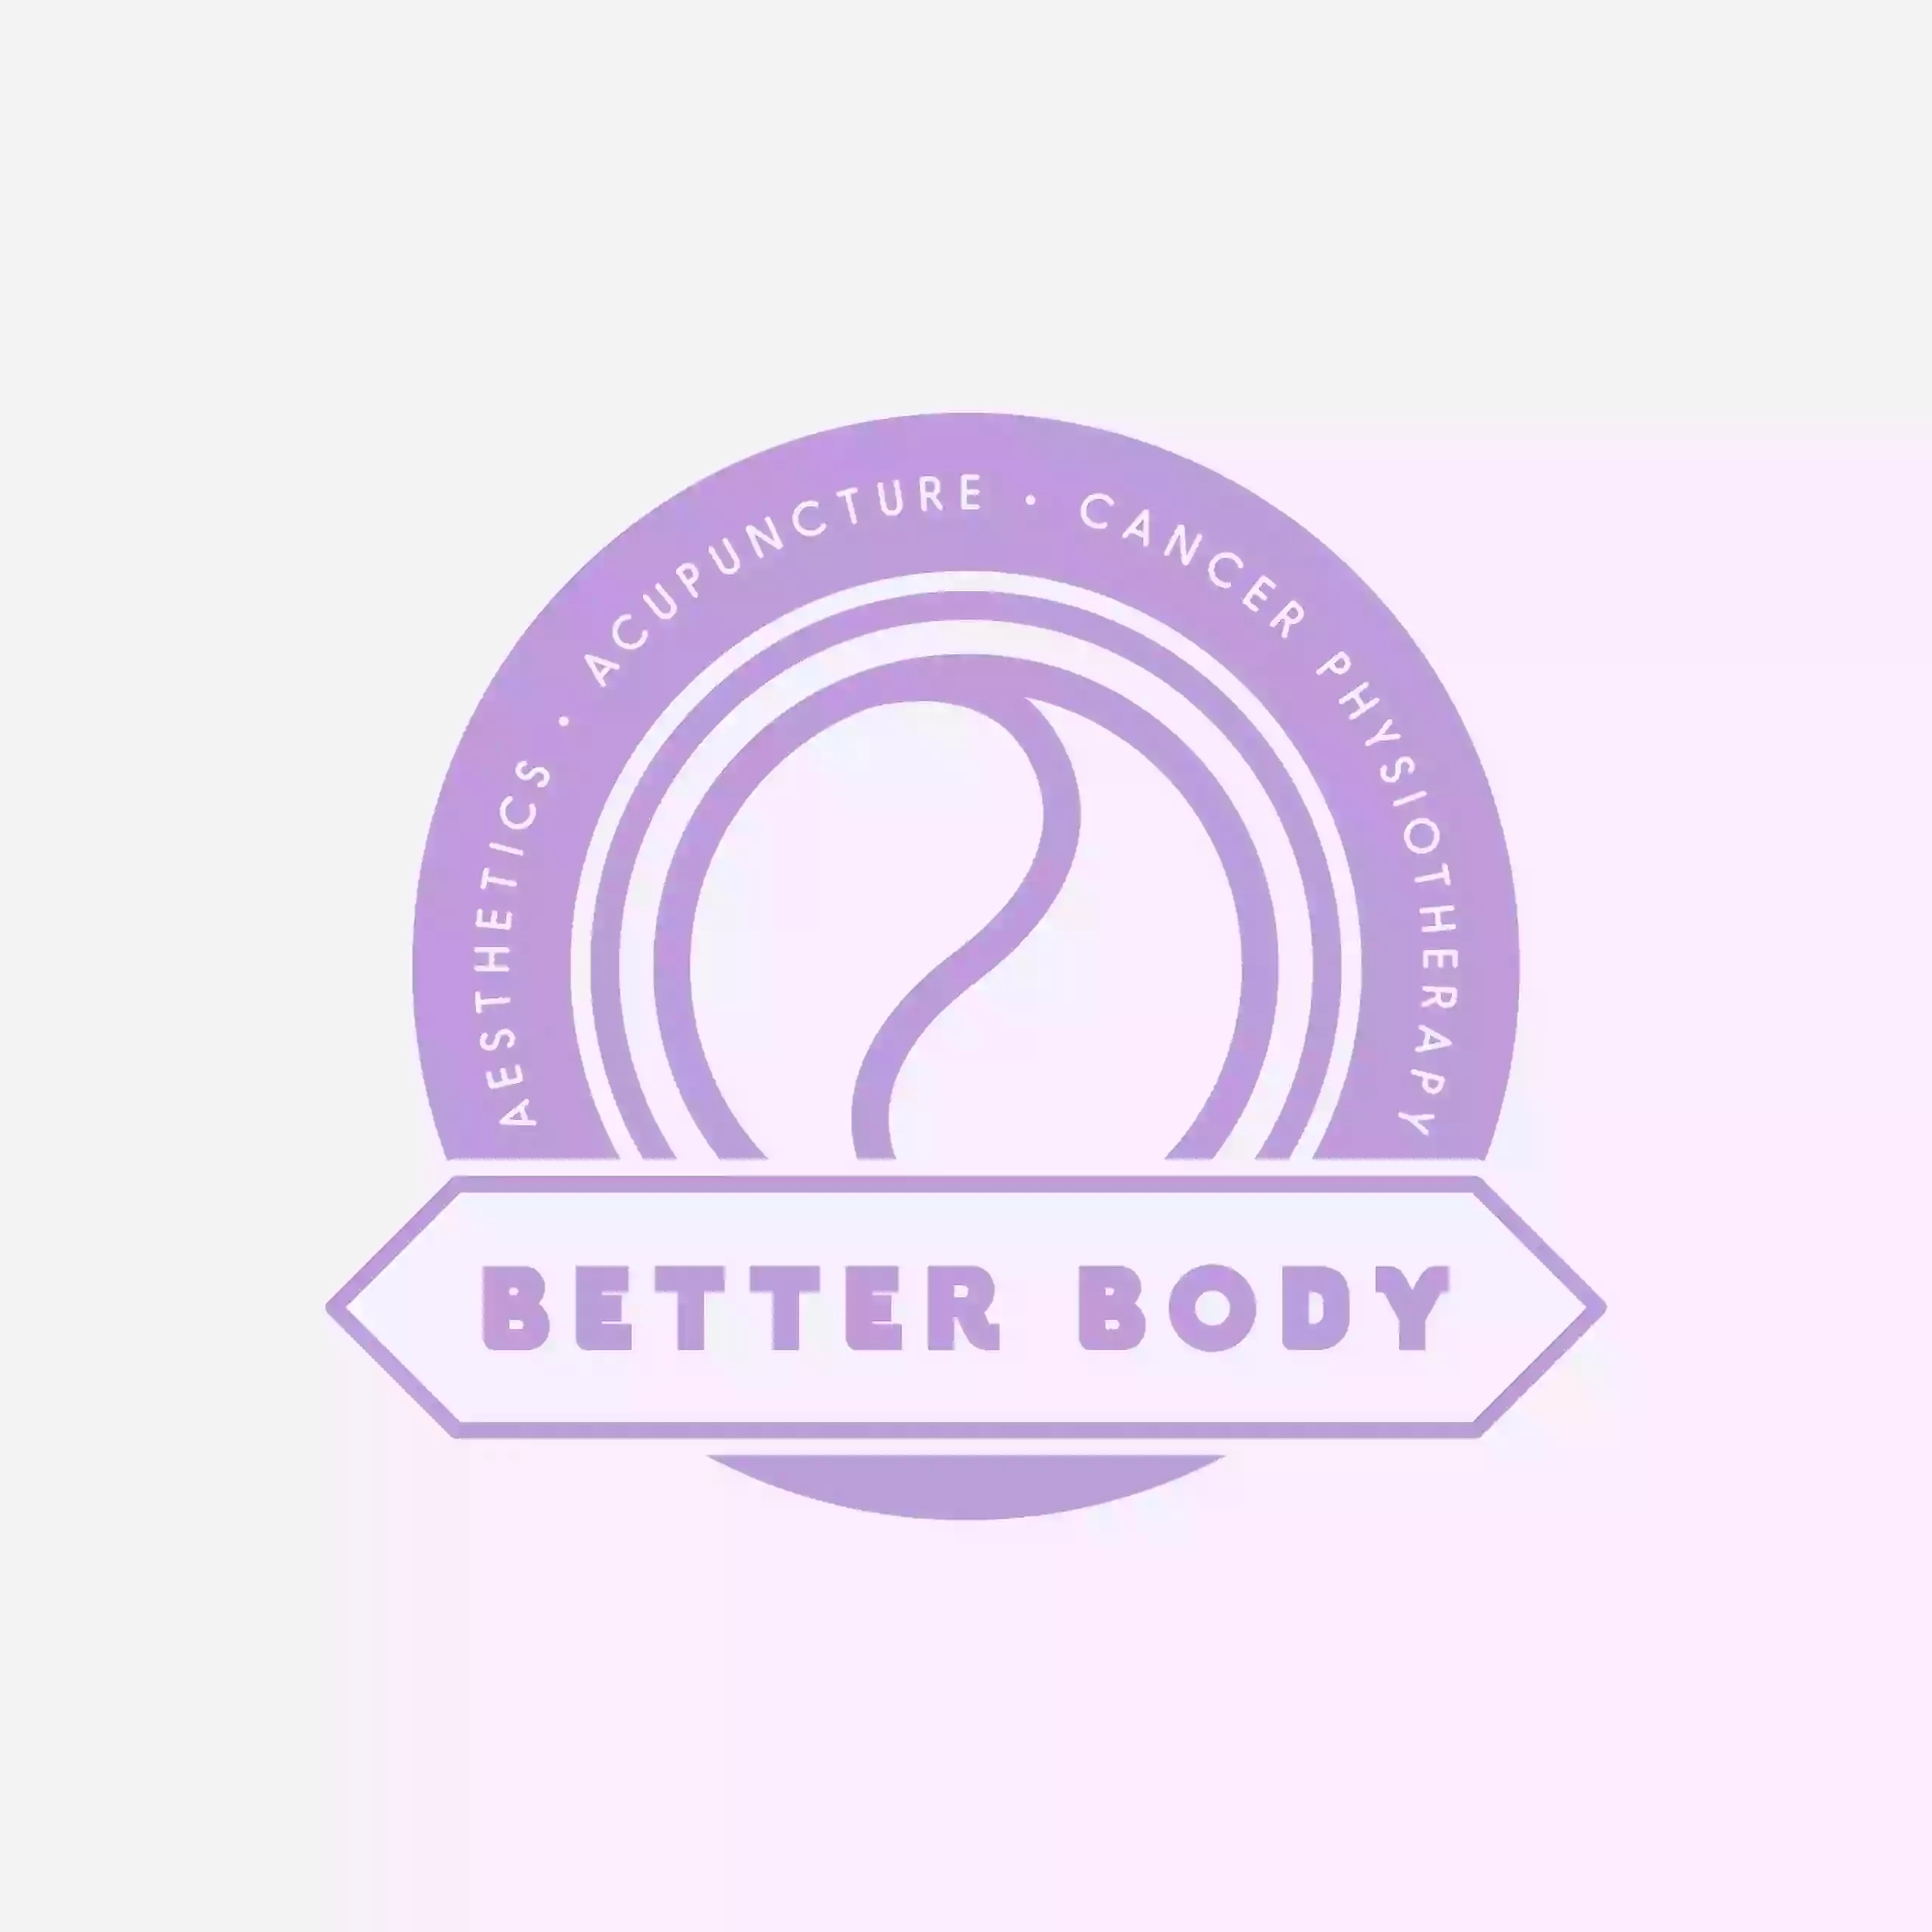 "Better Body" Aesthetics, Acupuncture, & Cancer Physiotherapy: Bath